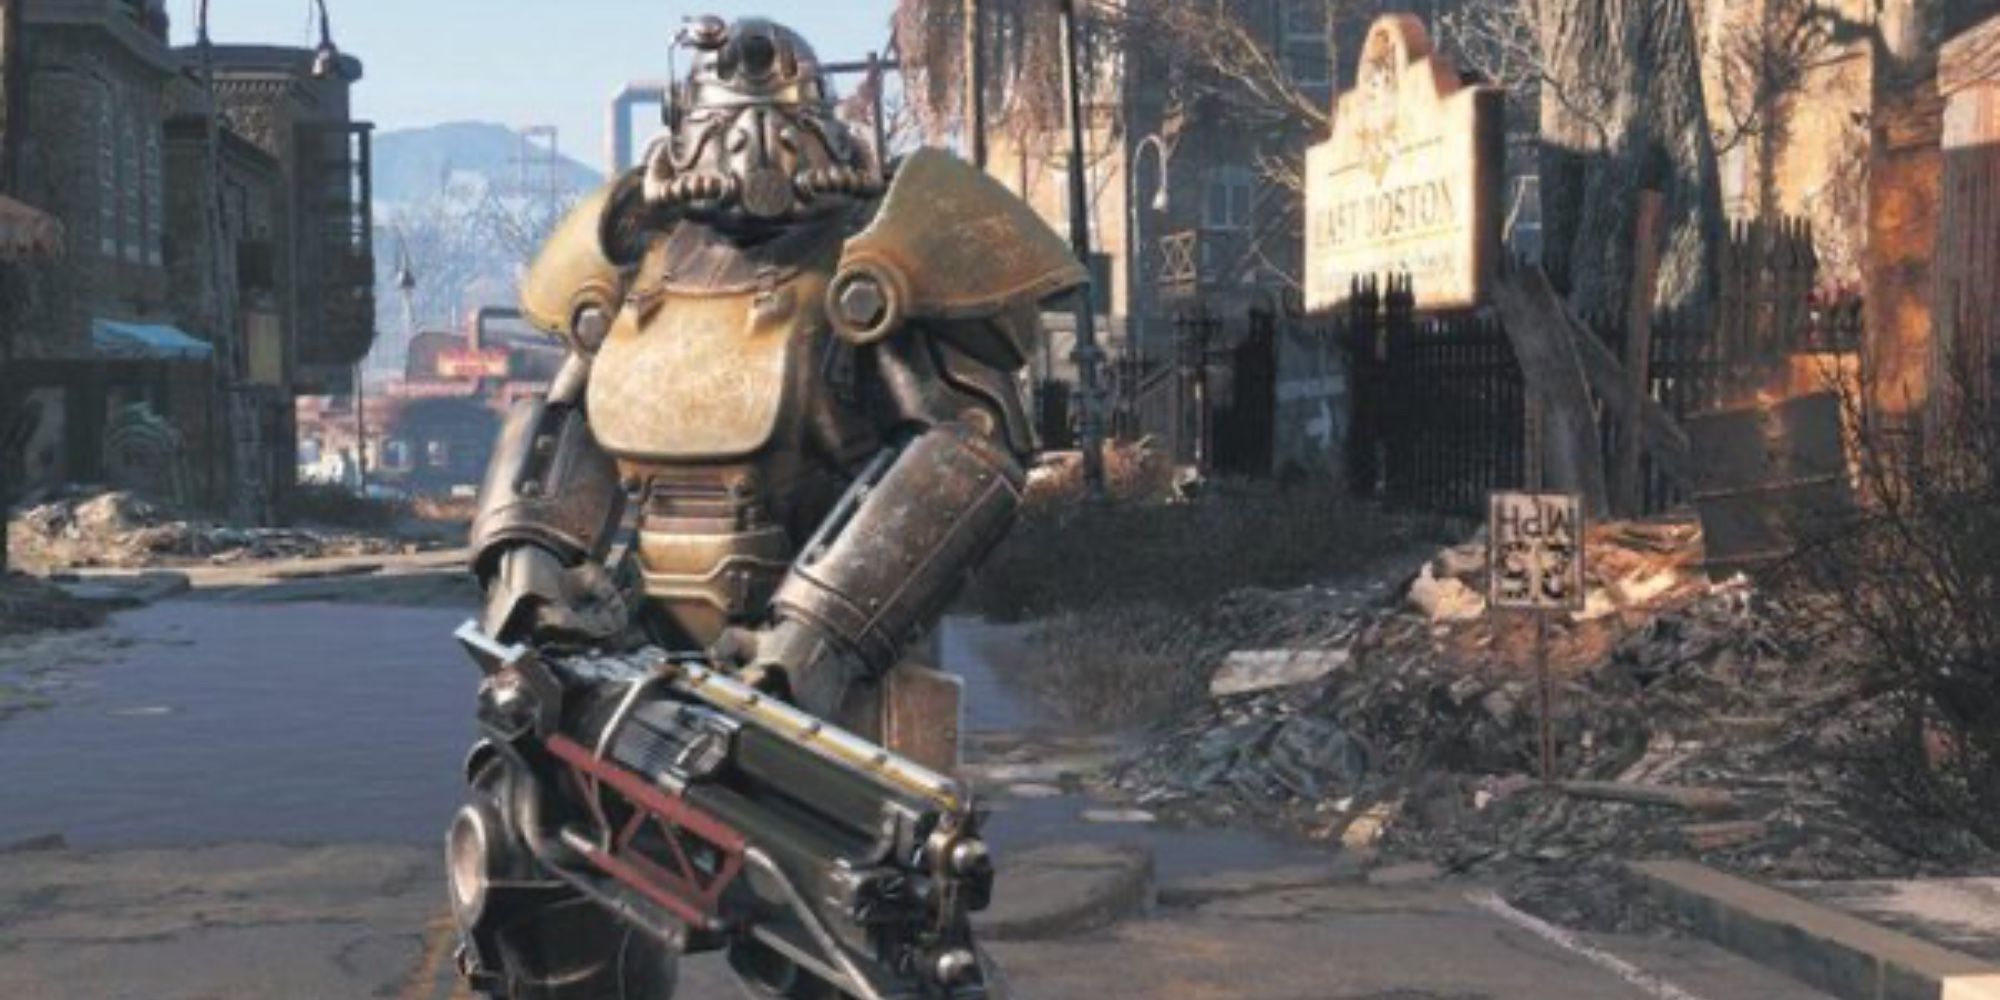 Fallout 76 Someone in power armor holding a Laser Gatling gun